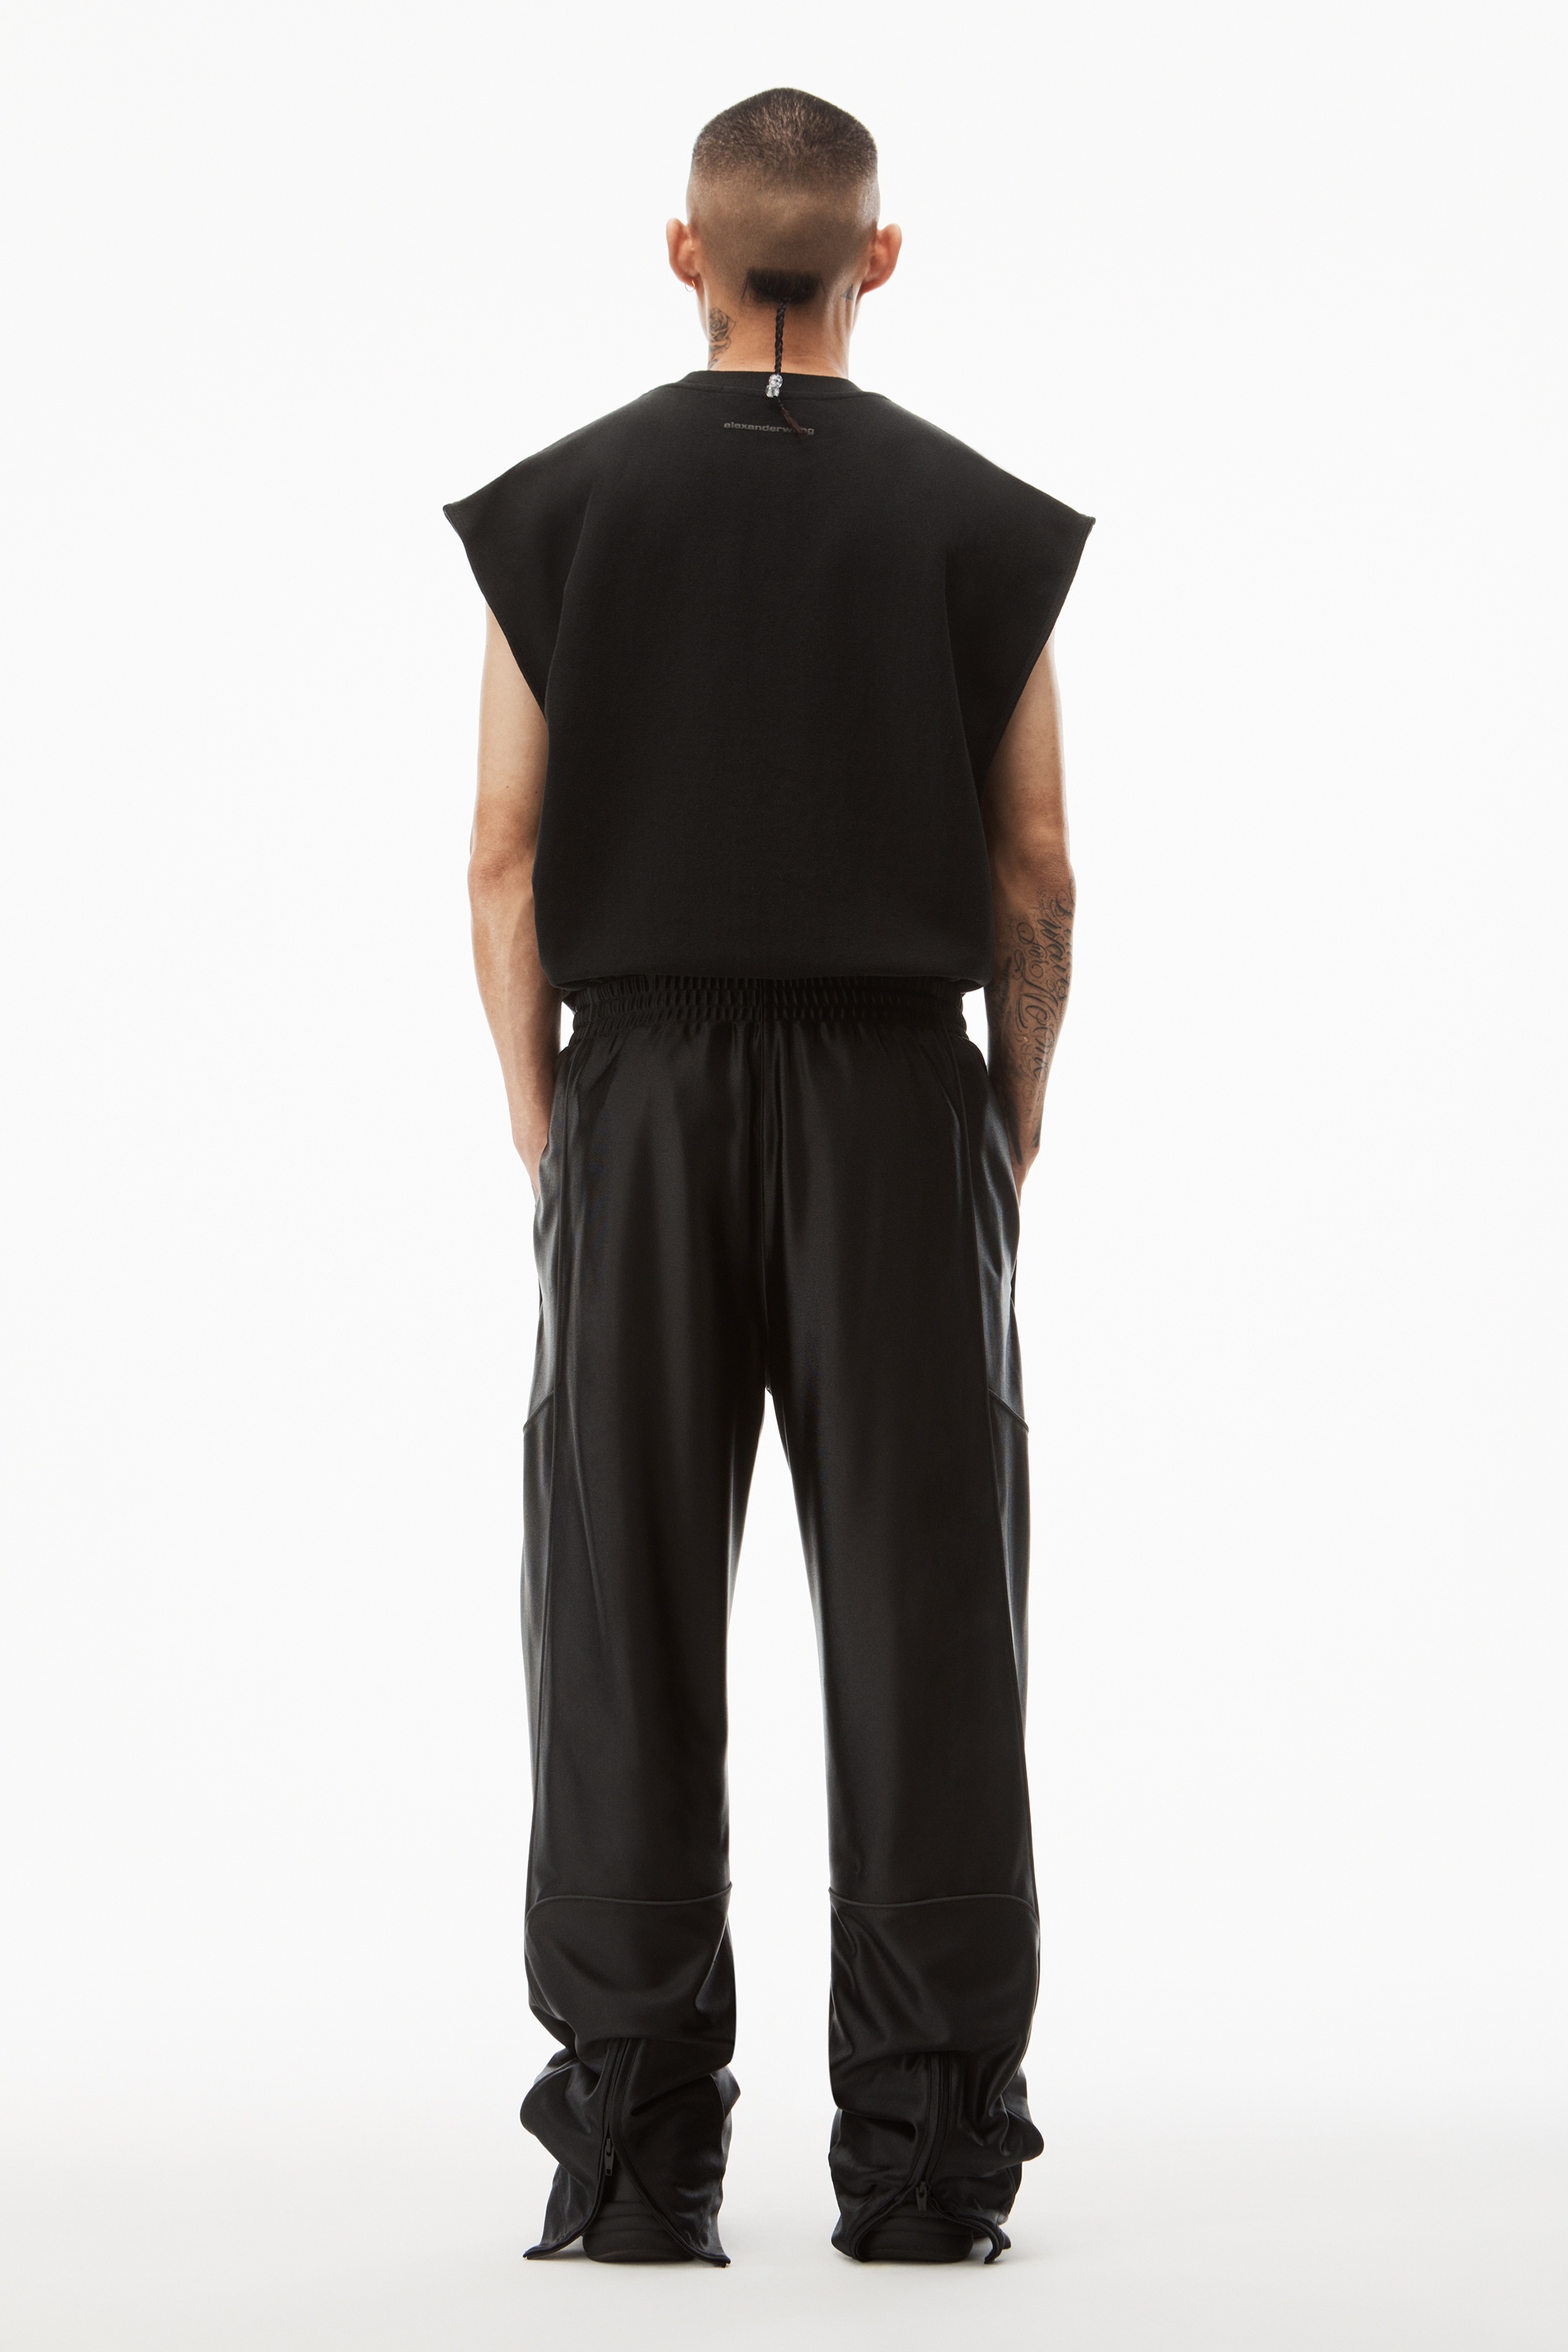 TRACK PANTS IN SATIN FAILLE JERSEY - 5